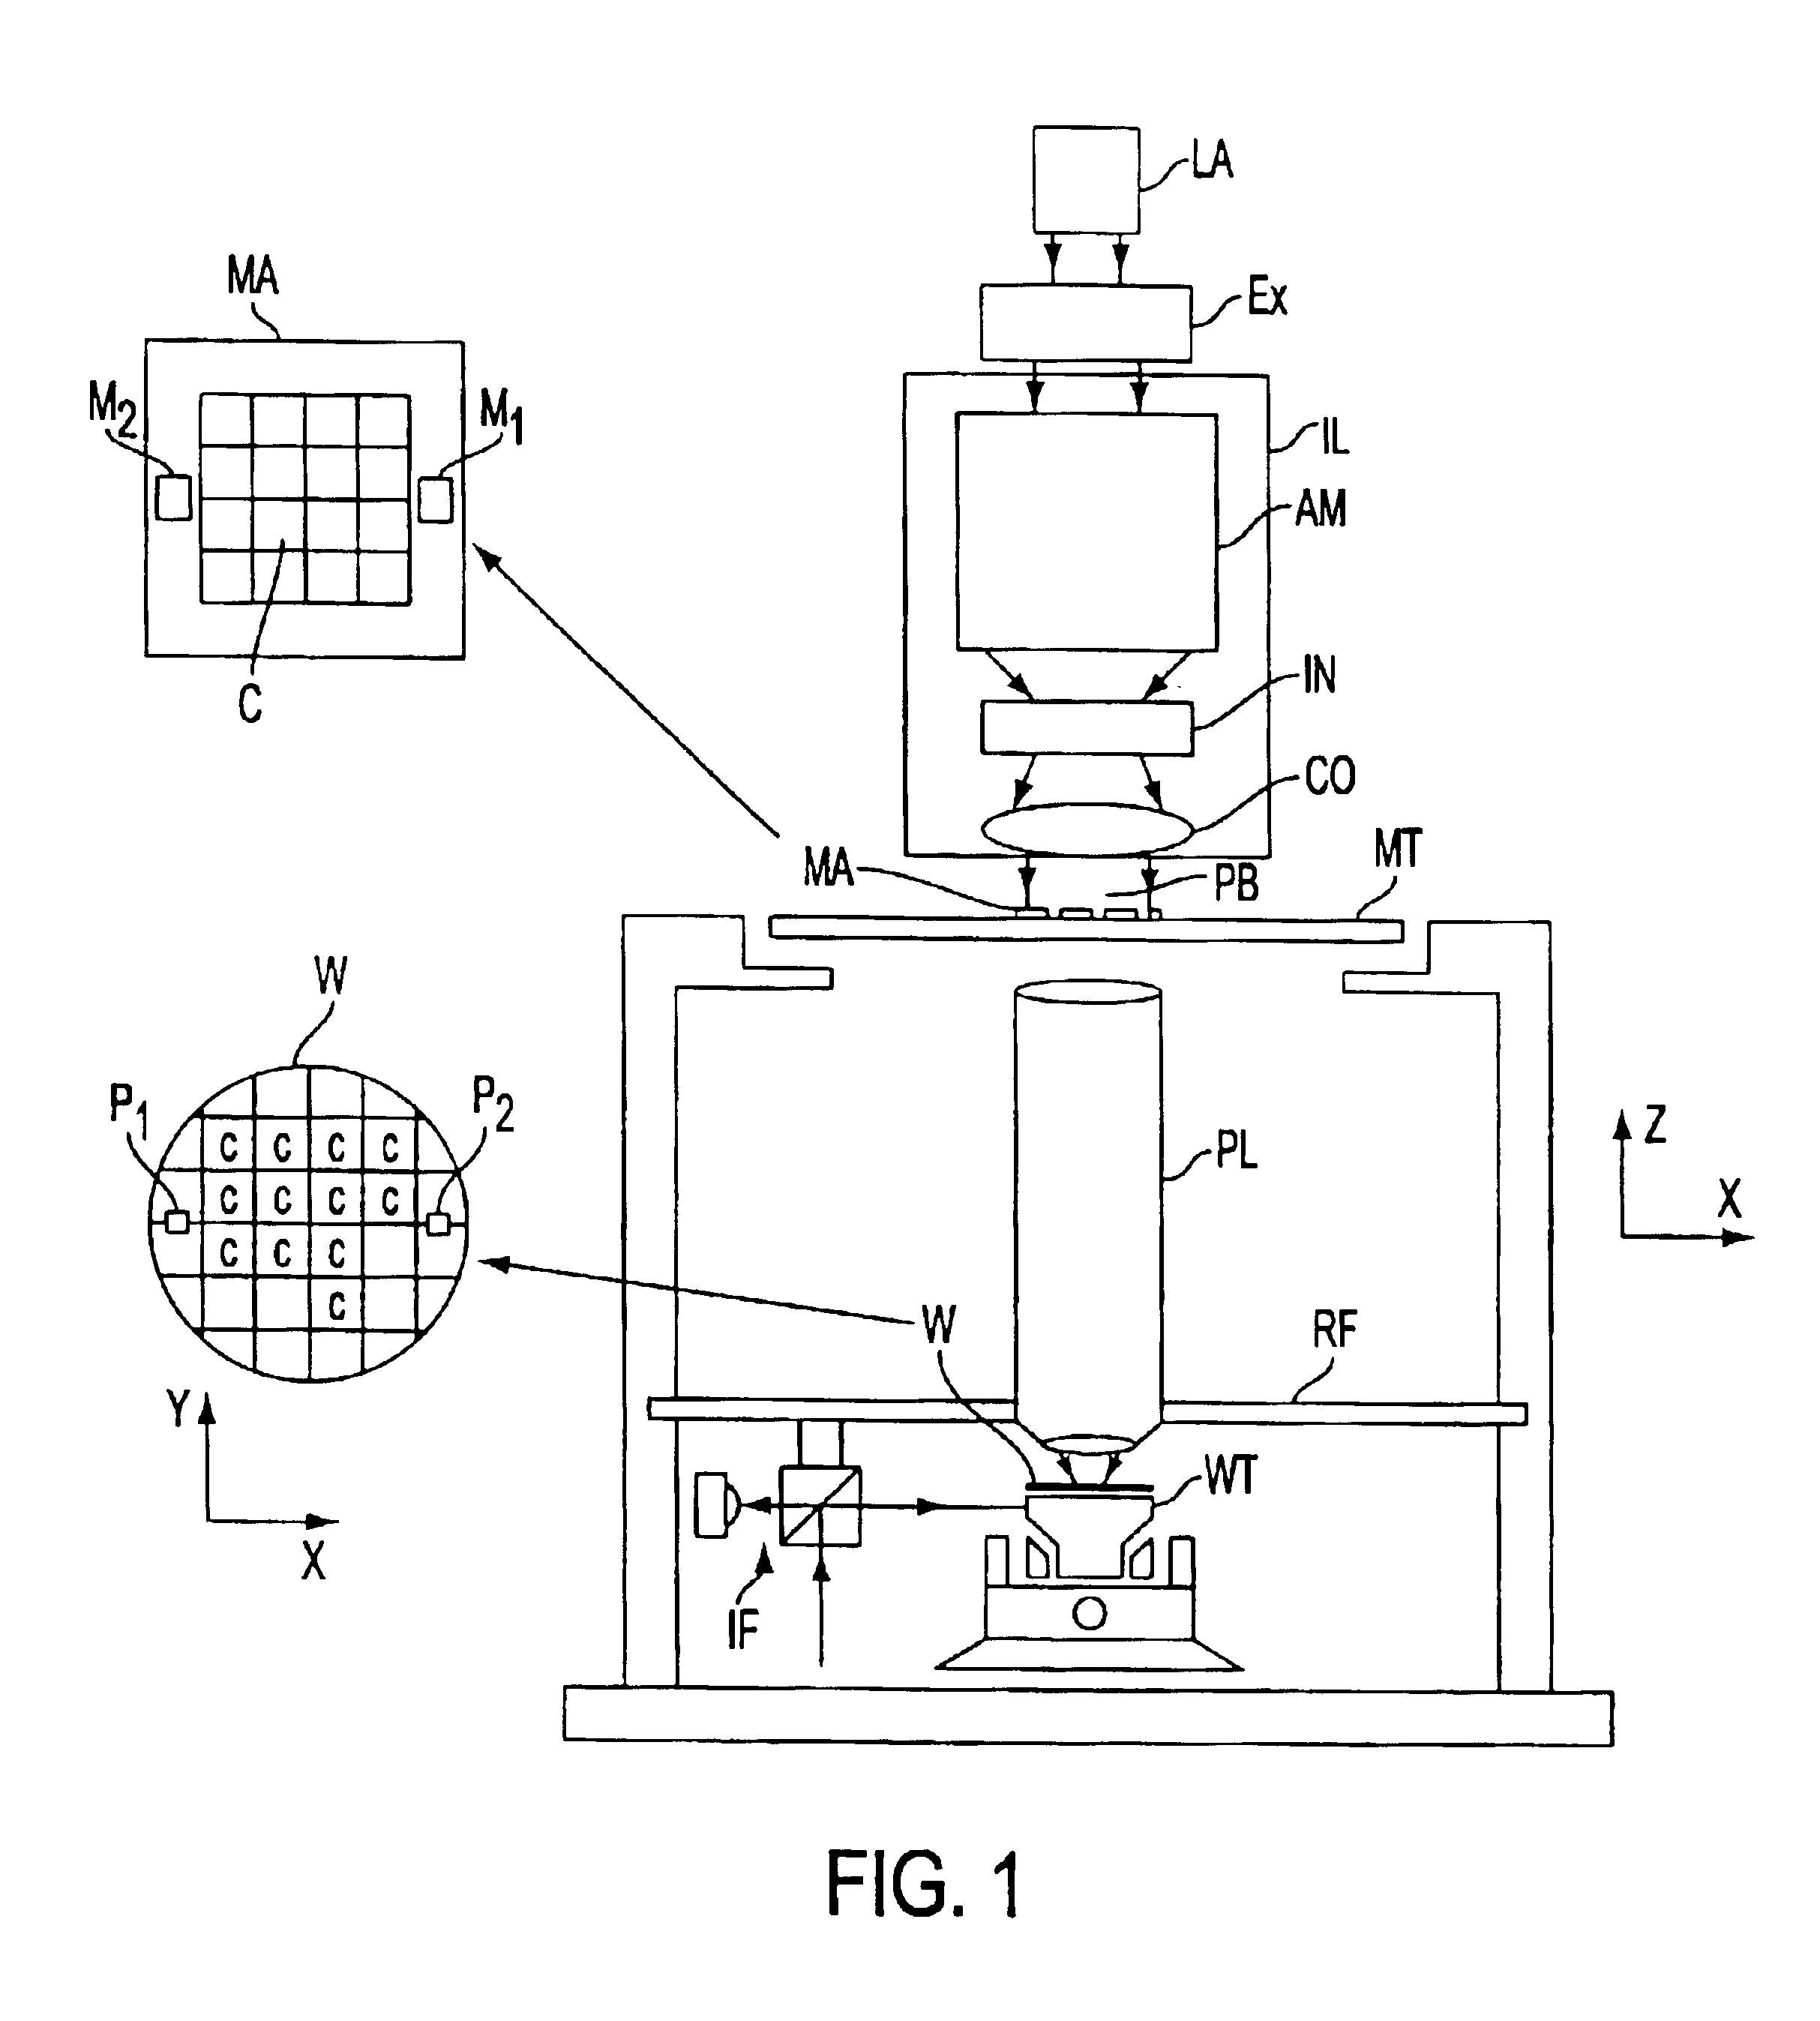 Method of removing assist features utilized to improve process latitude